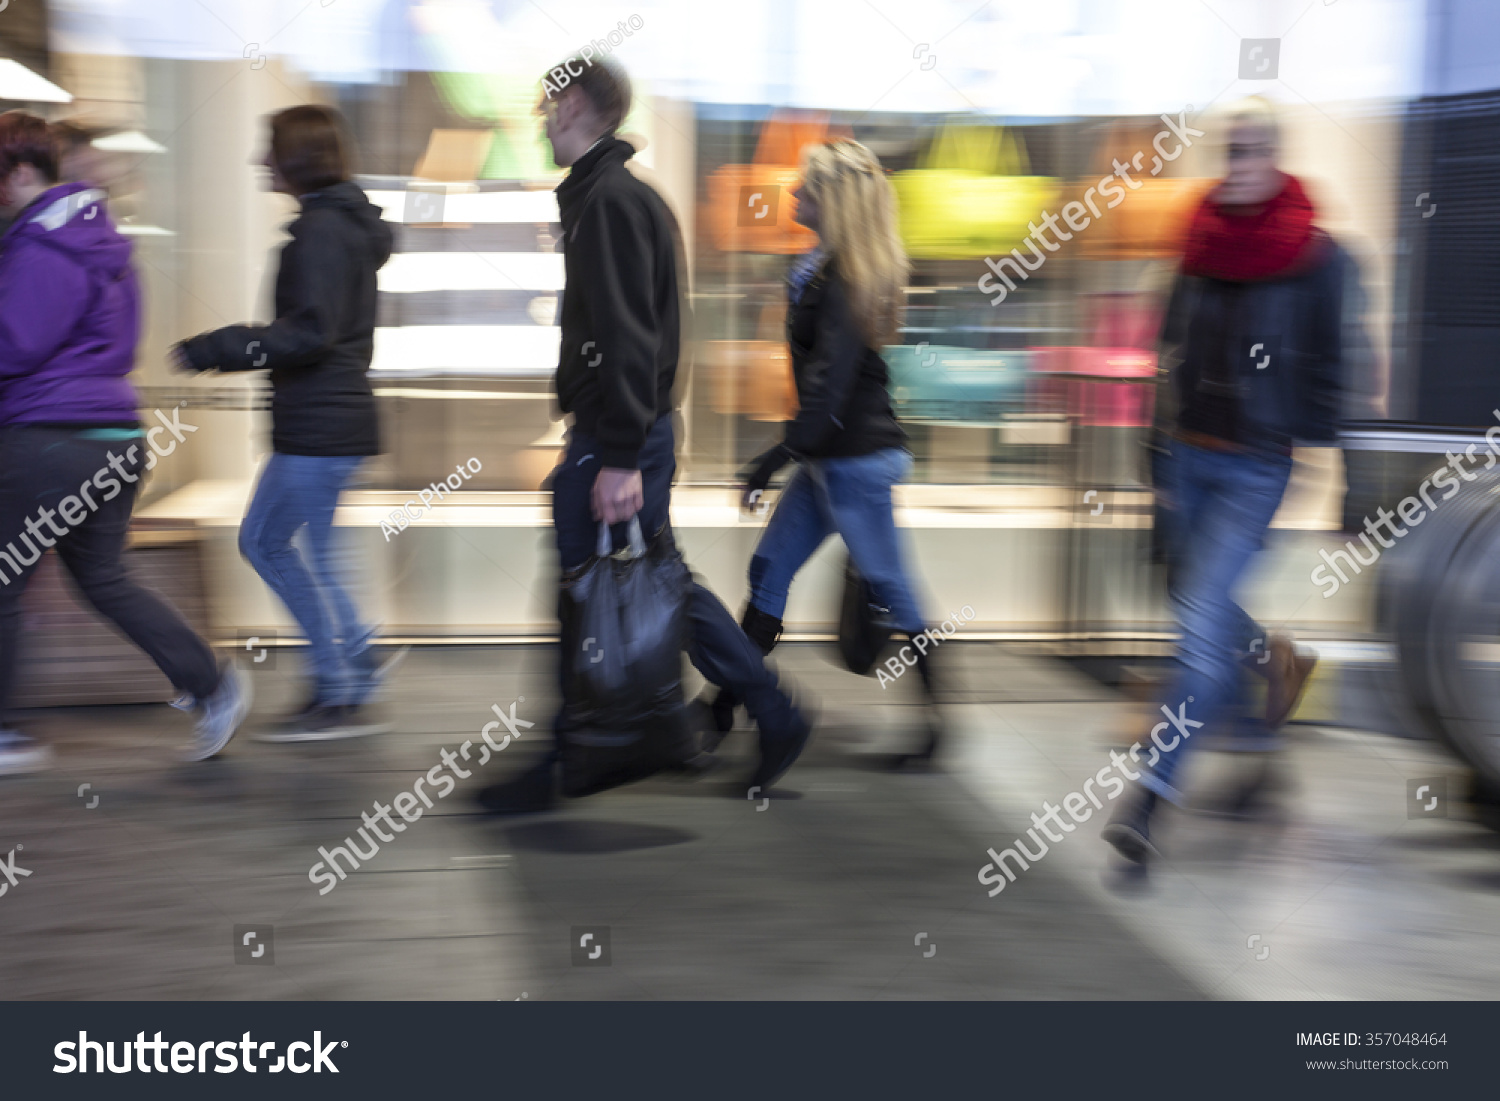 Intentional blurred image of people in shopping center   #357048464